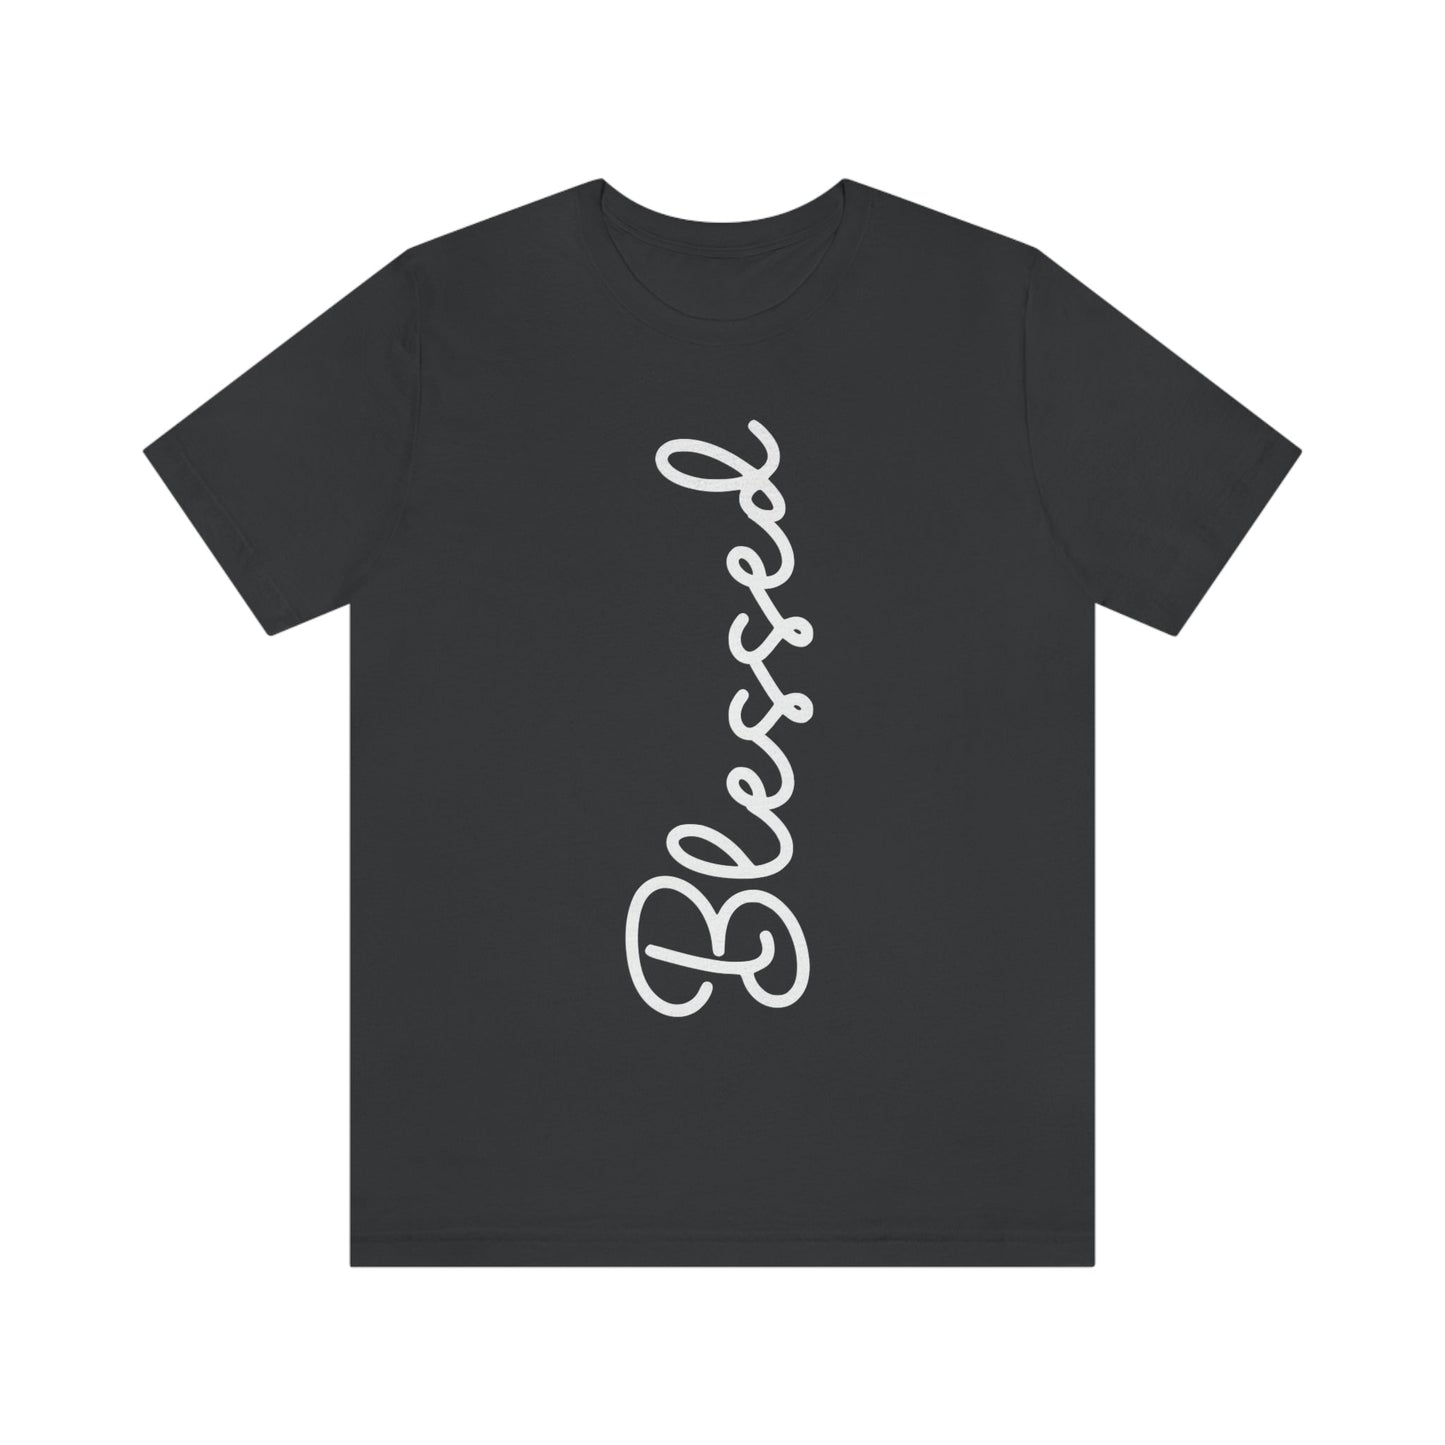 Blessed (Graphic White Text) Unisex Jersey Short Sleeve Tee - Style: Bella+Canvas 3001